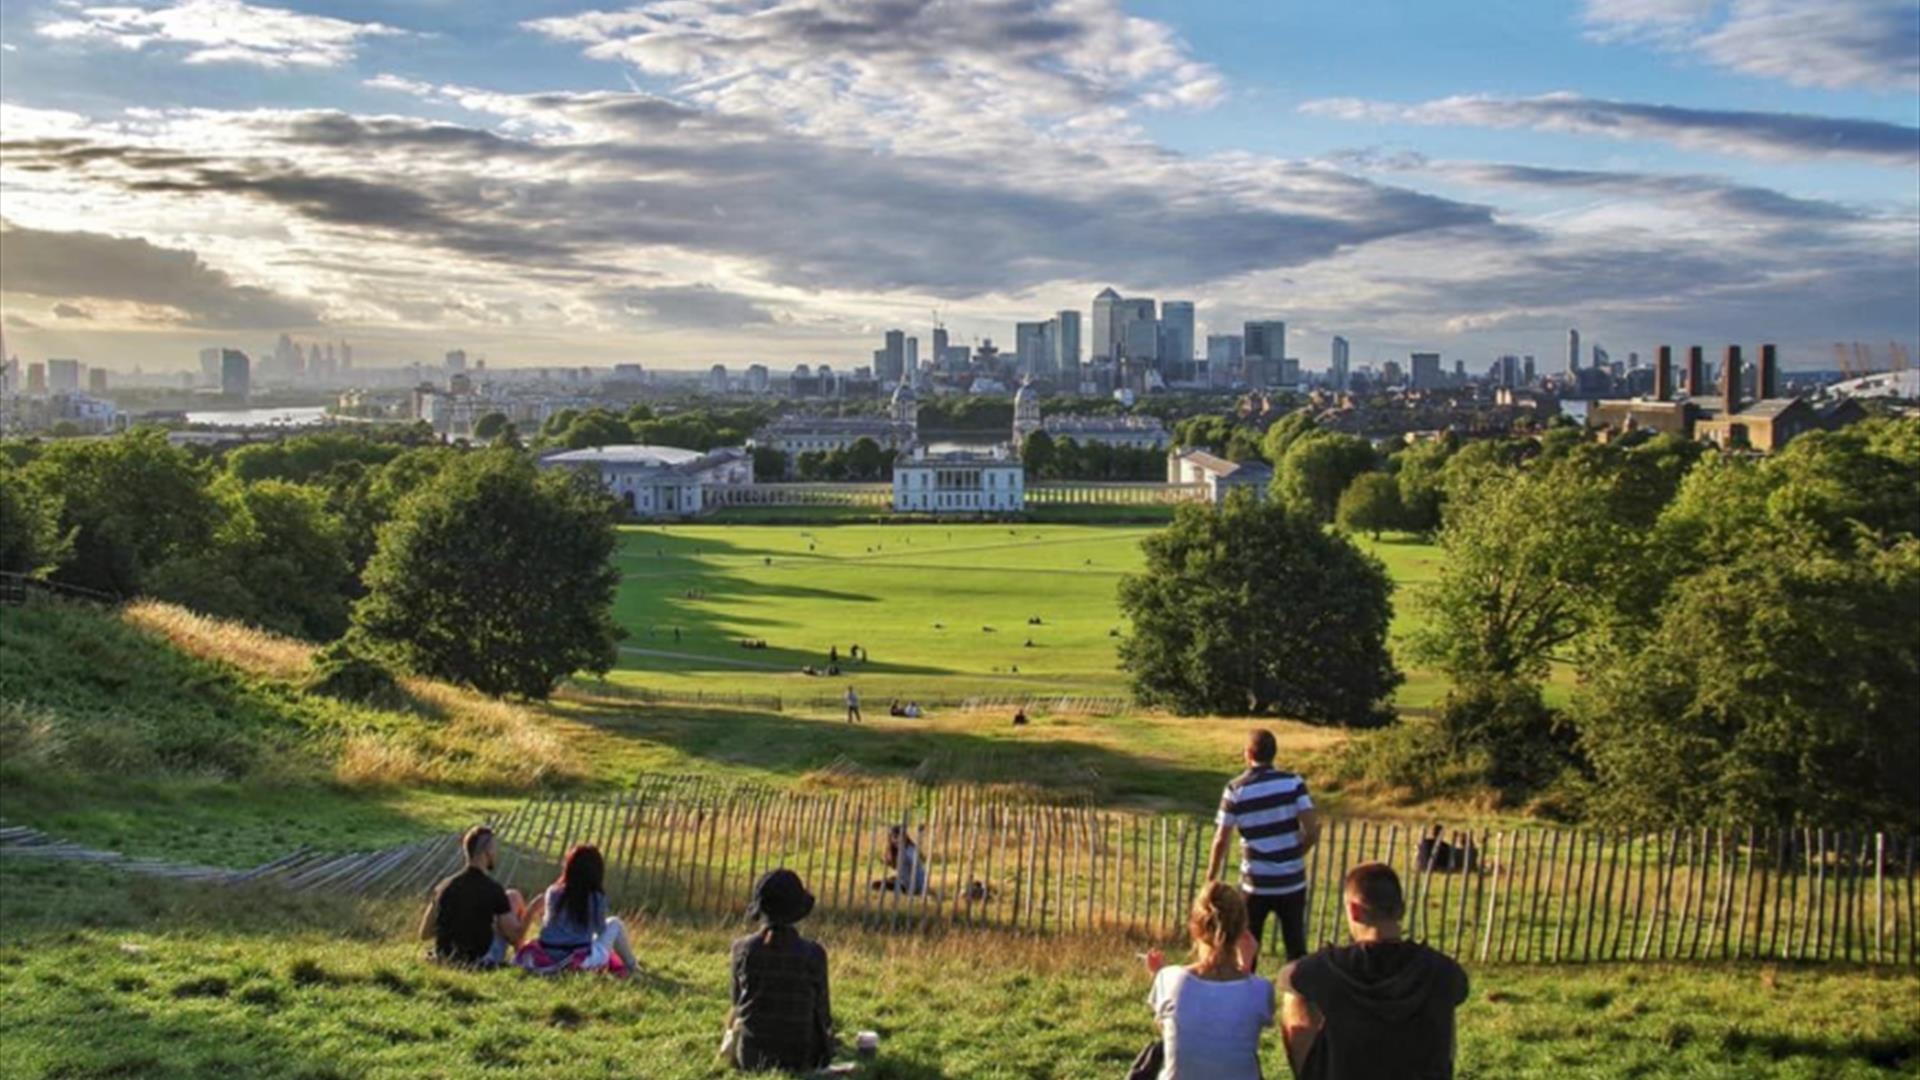 People sitting down in Greenwich Park looking at the view.